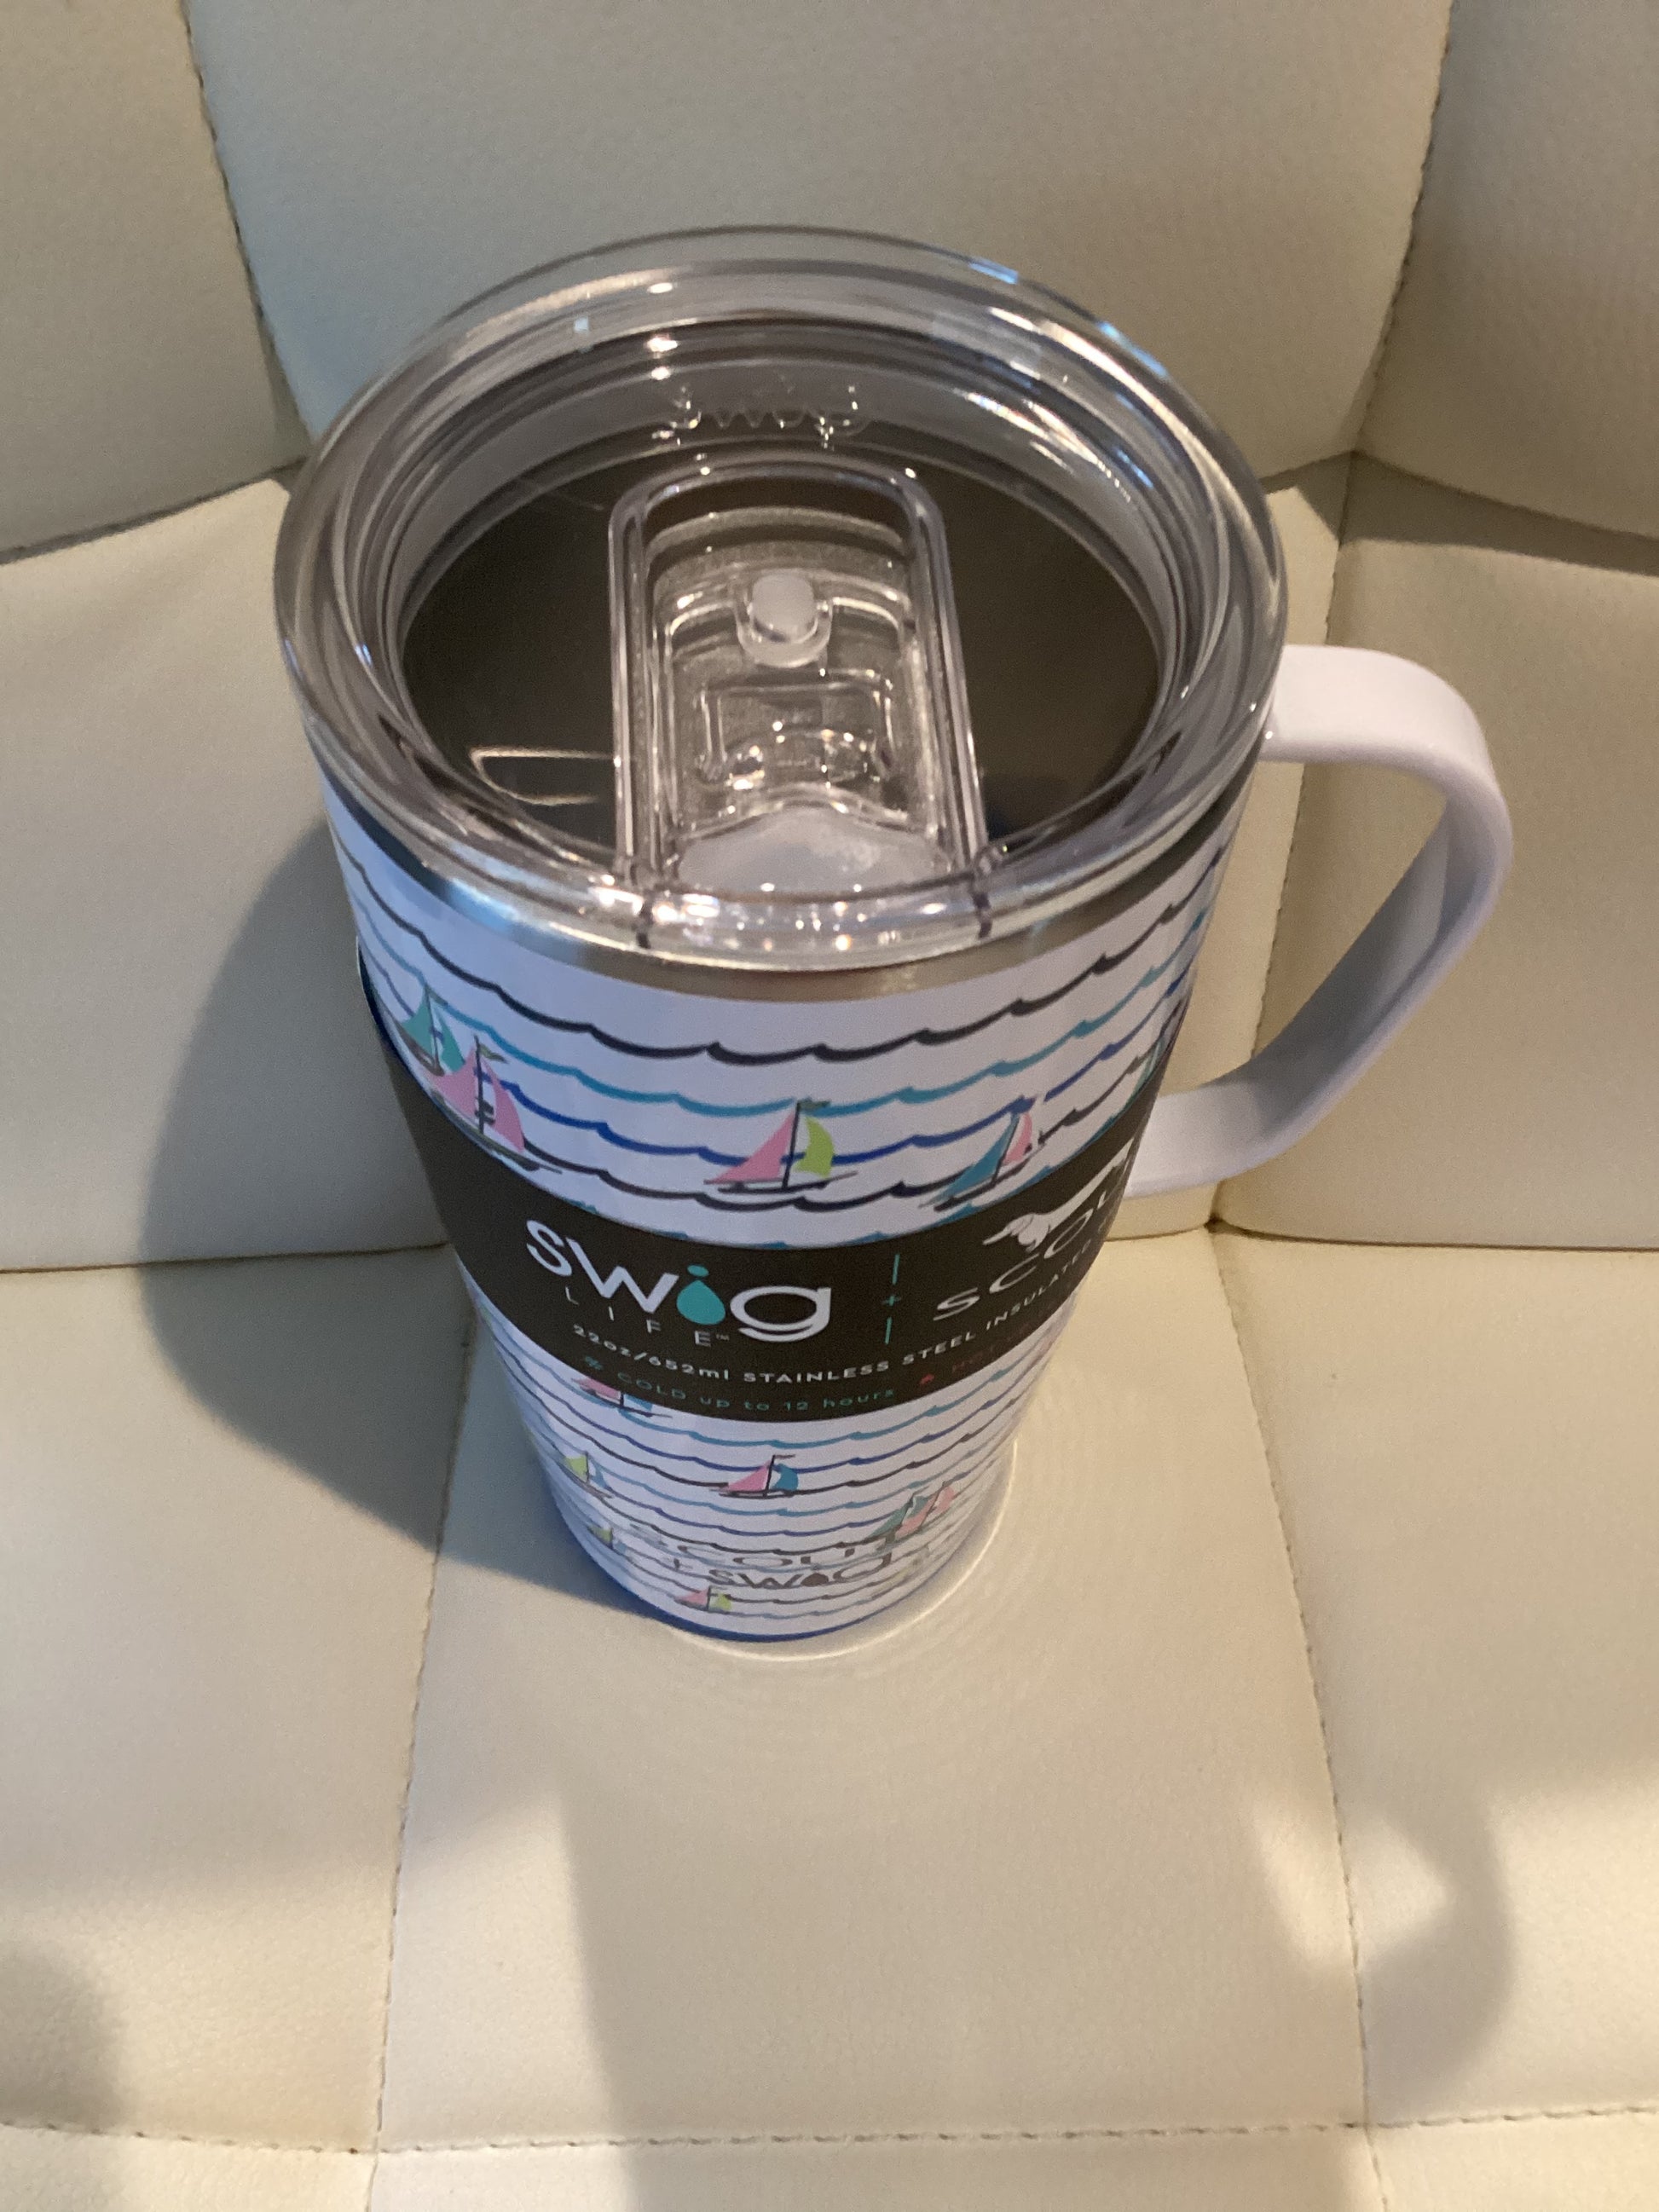 Insulated Stainless Steel Travel Mugs with Handles - Swig Life